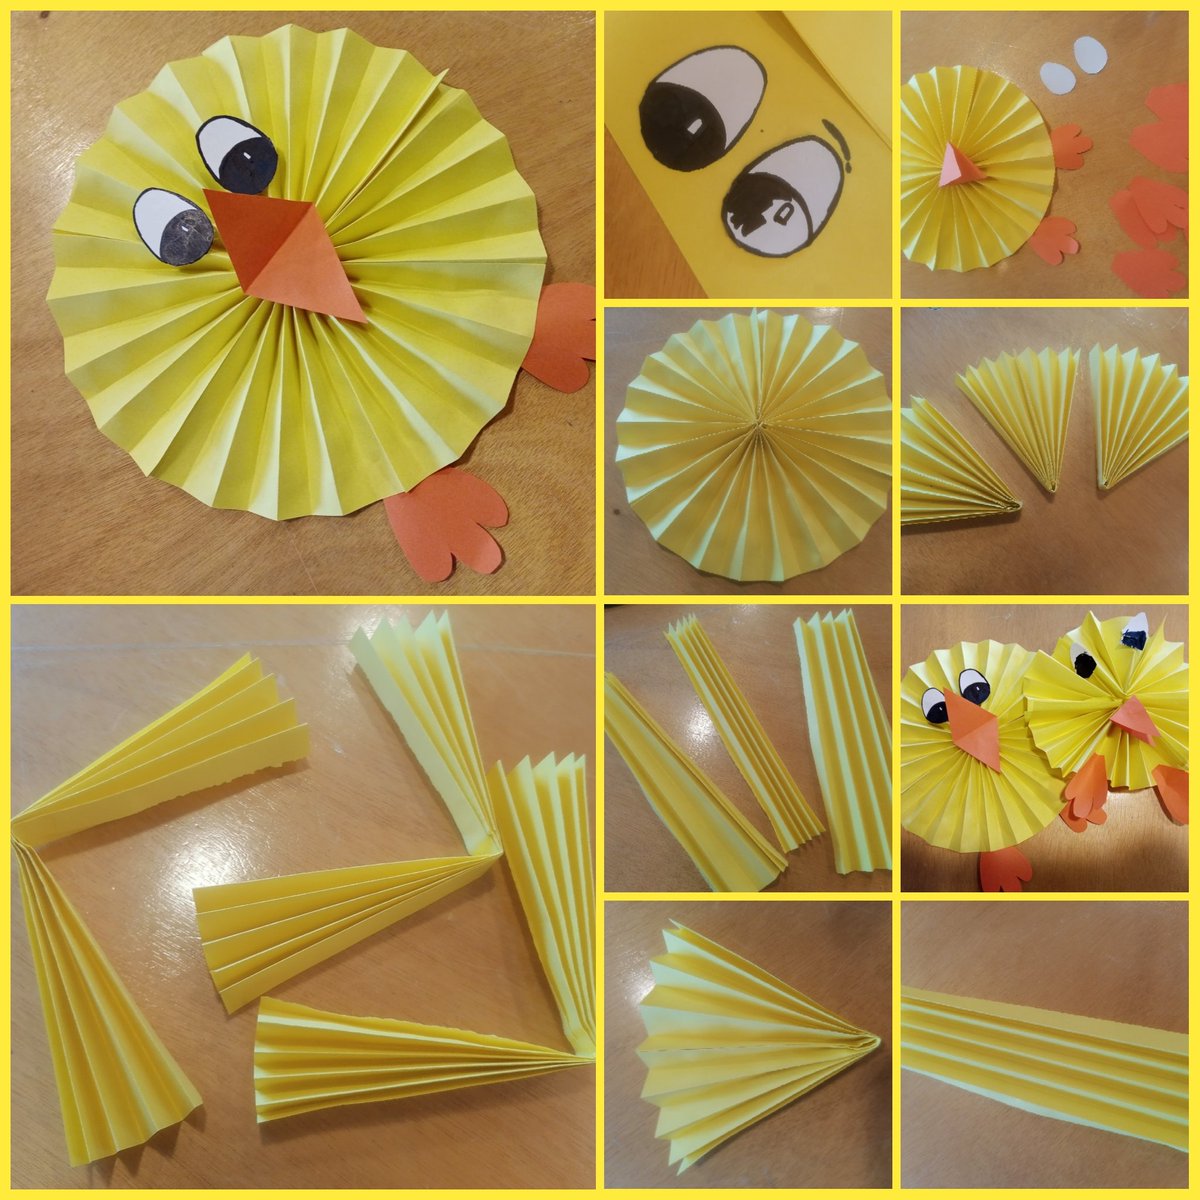 Looking for a quick and simple Easter  craft to do? Here is our crafty chick rosettes! All you need is some card, scissors and glue! #art #artsandcrafts #artsandcraftsmovement #artsandcraftsforkids #crafts #crafty #craftsofinstagram #craftsofinstagram #easter #eastercrafts